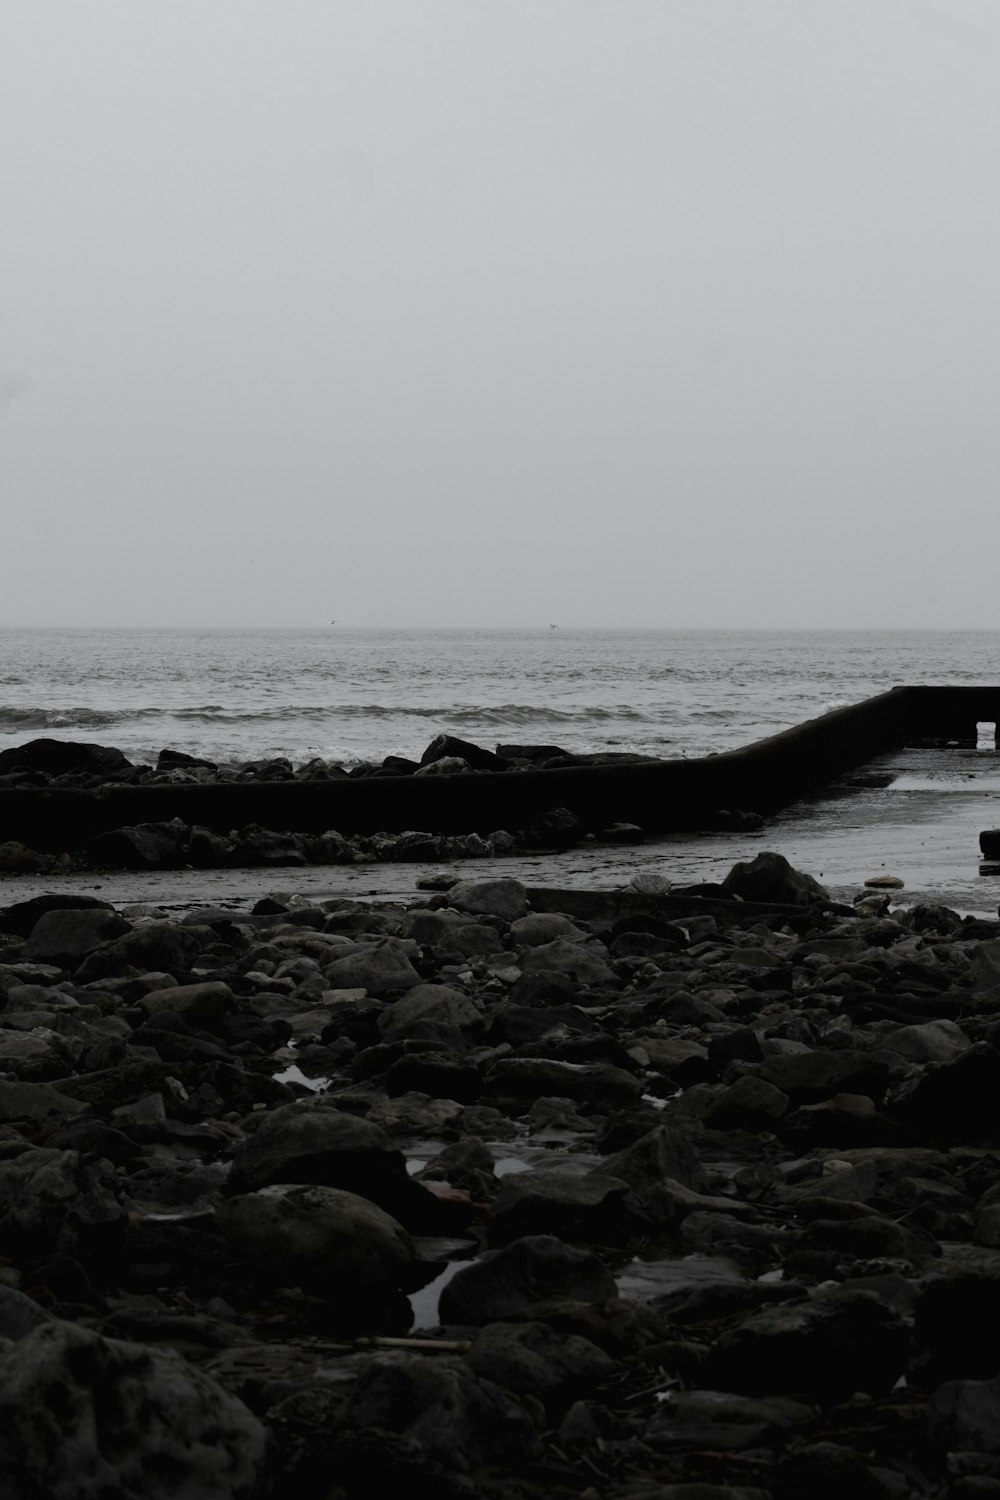 a black and white photo of a person walking on a rocky beach